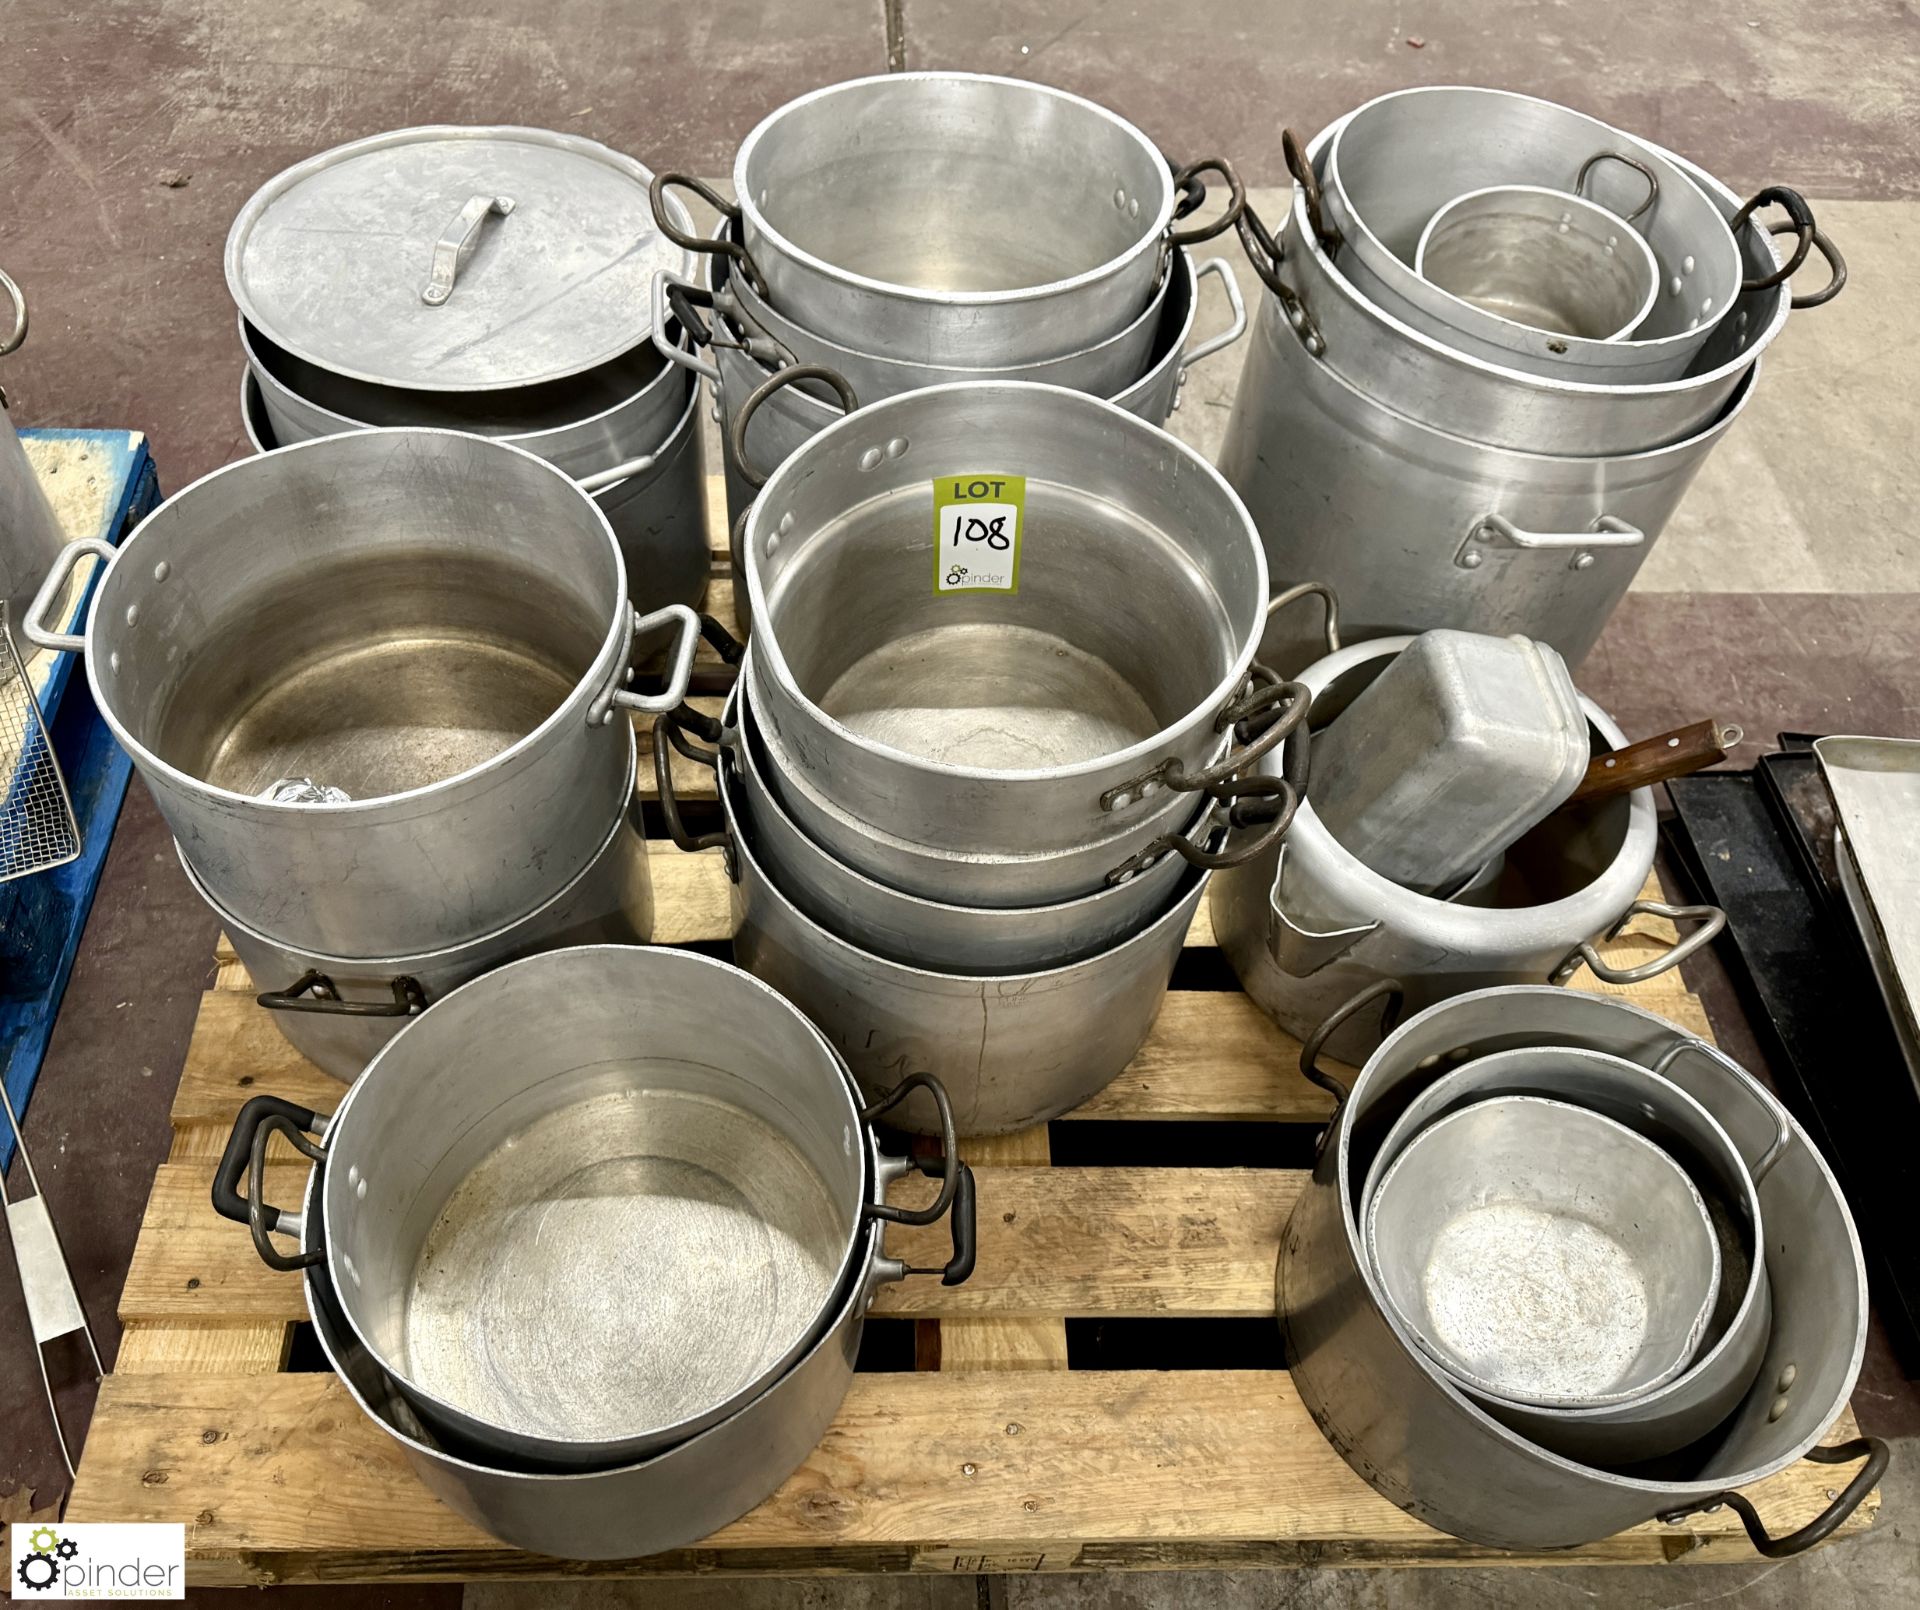 Quantity Cooking Pots, to pallet - Image 2 of 4